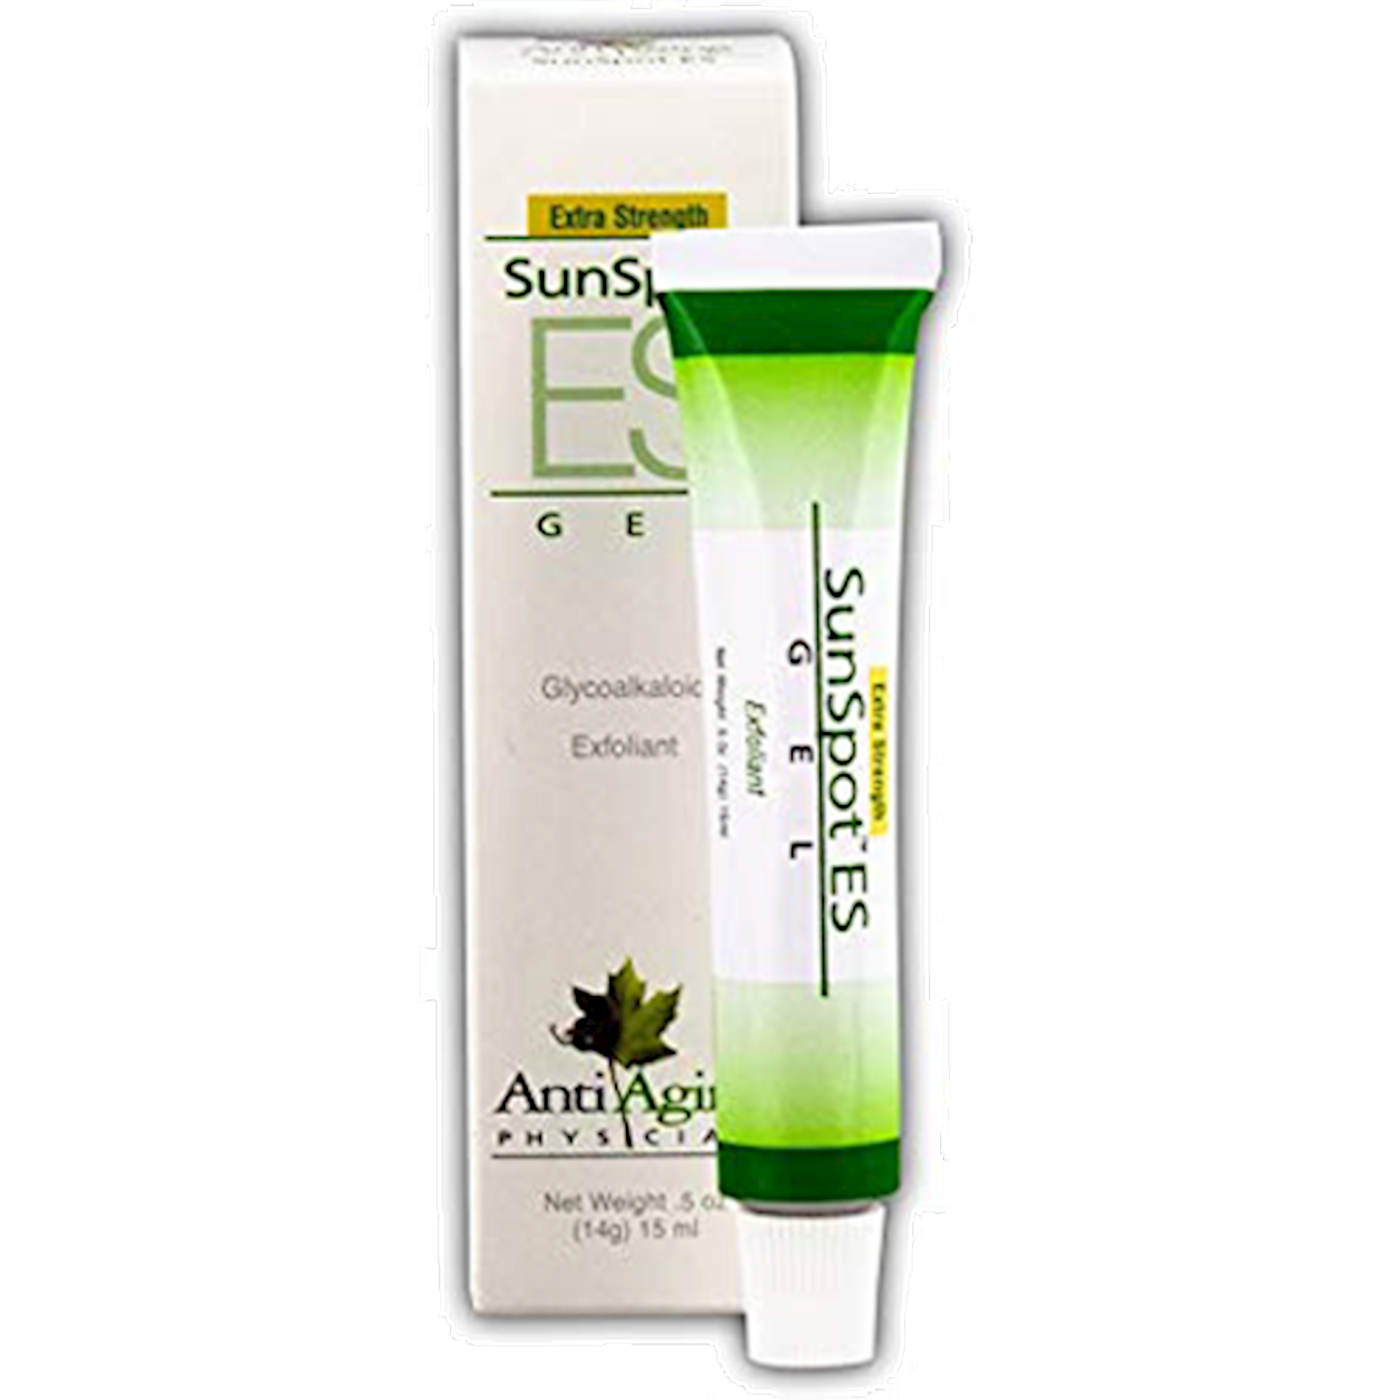 SunSpot ES .5 oz Curated Wellness